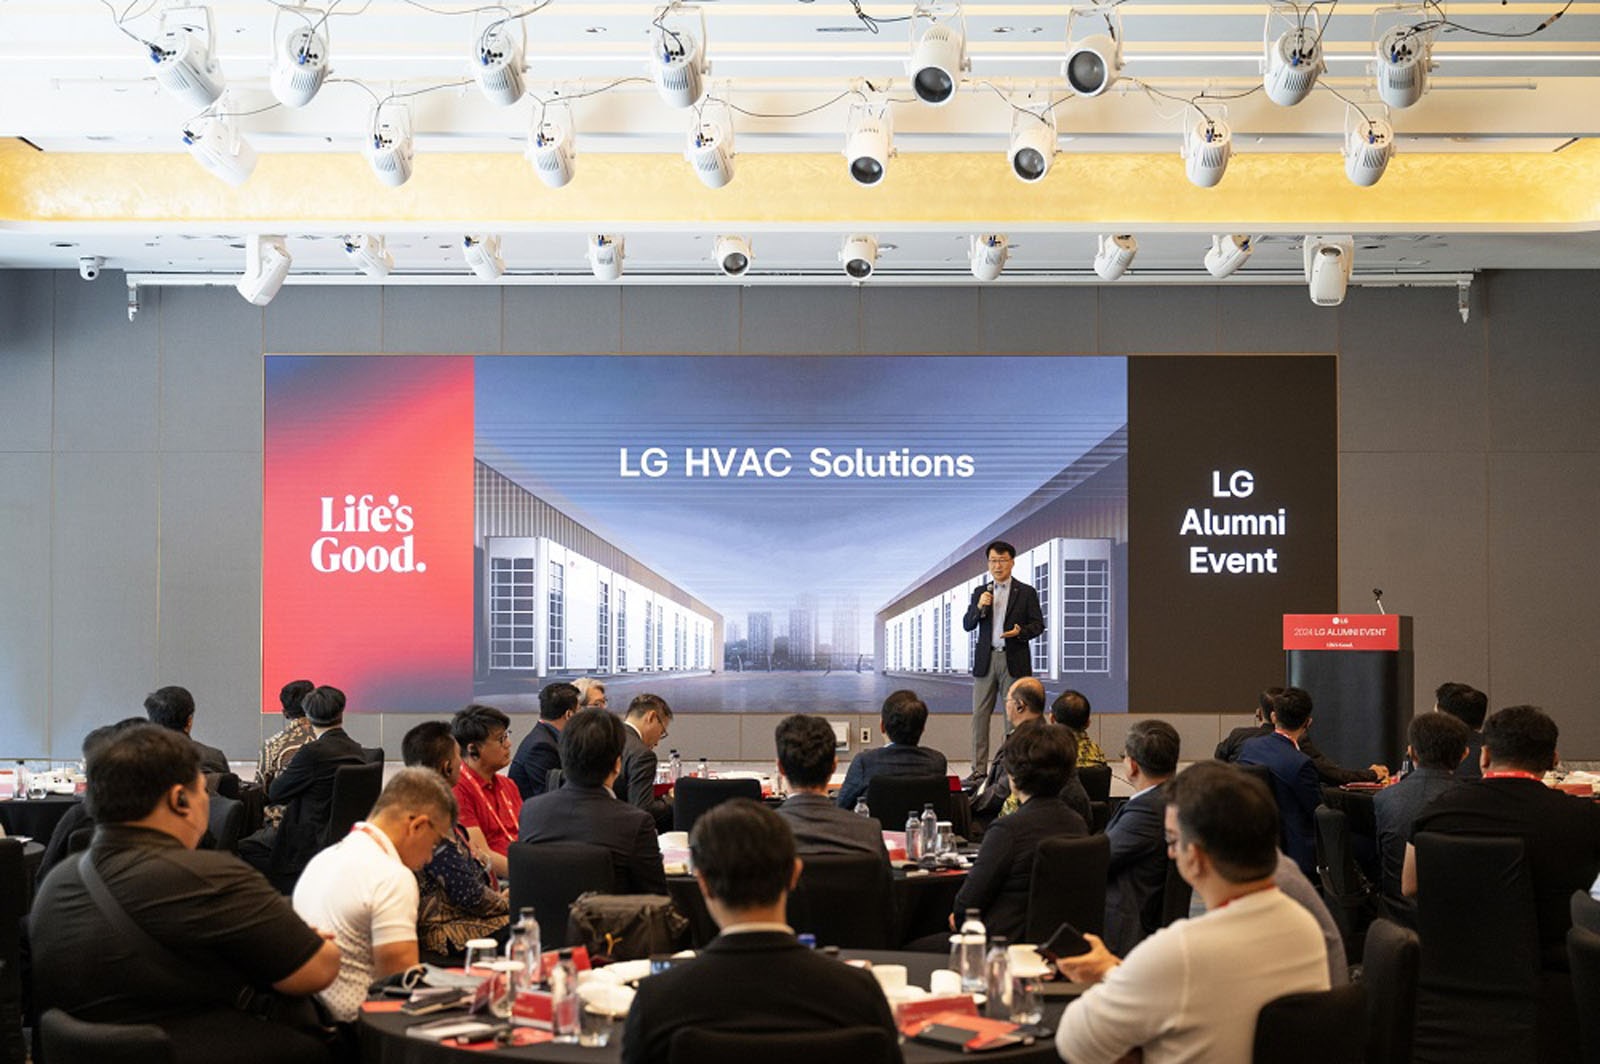 LG announced its plan to more than double the sales volume of its residential and commercial HVAC business by 2030